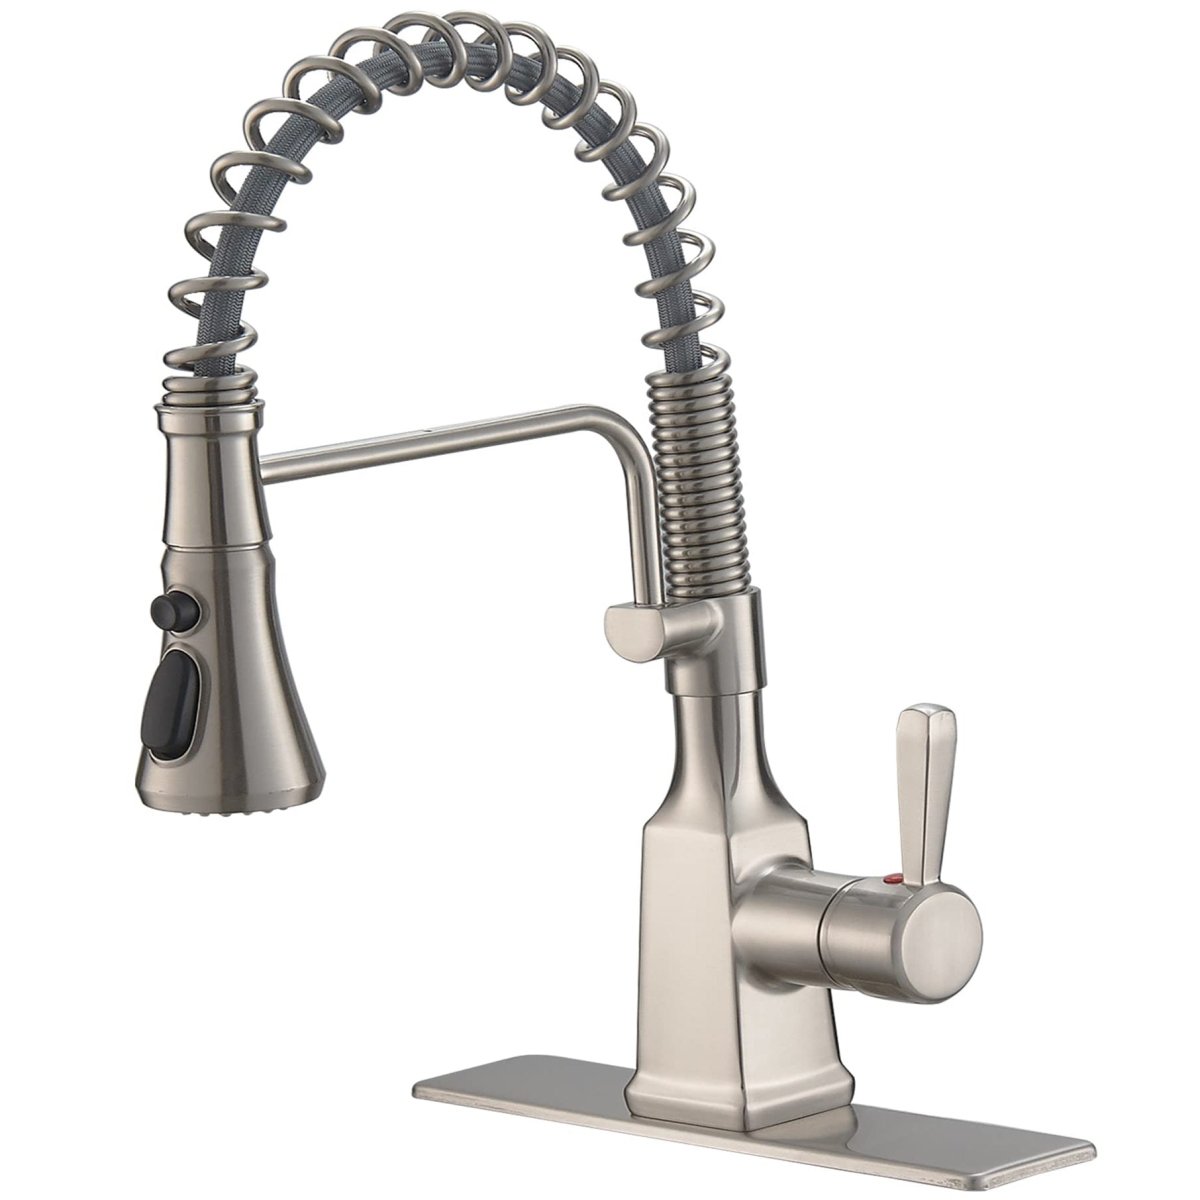 Spring-Spout Sprayer 3 Spray Kitchen Faucet Brushed Nickel - buyfaucet.com